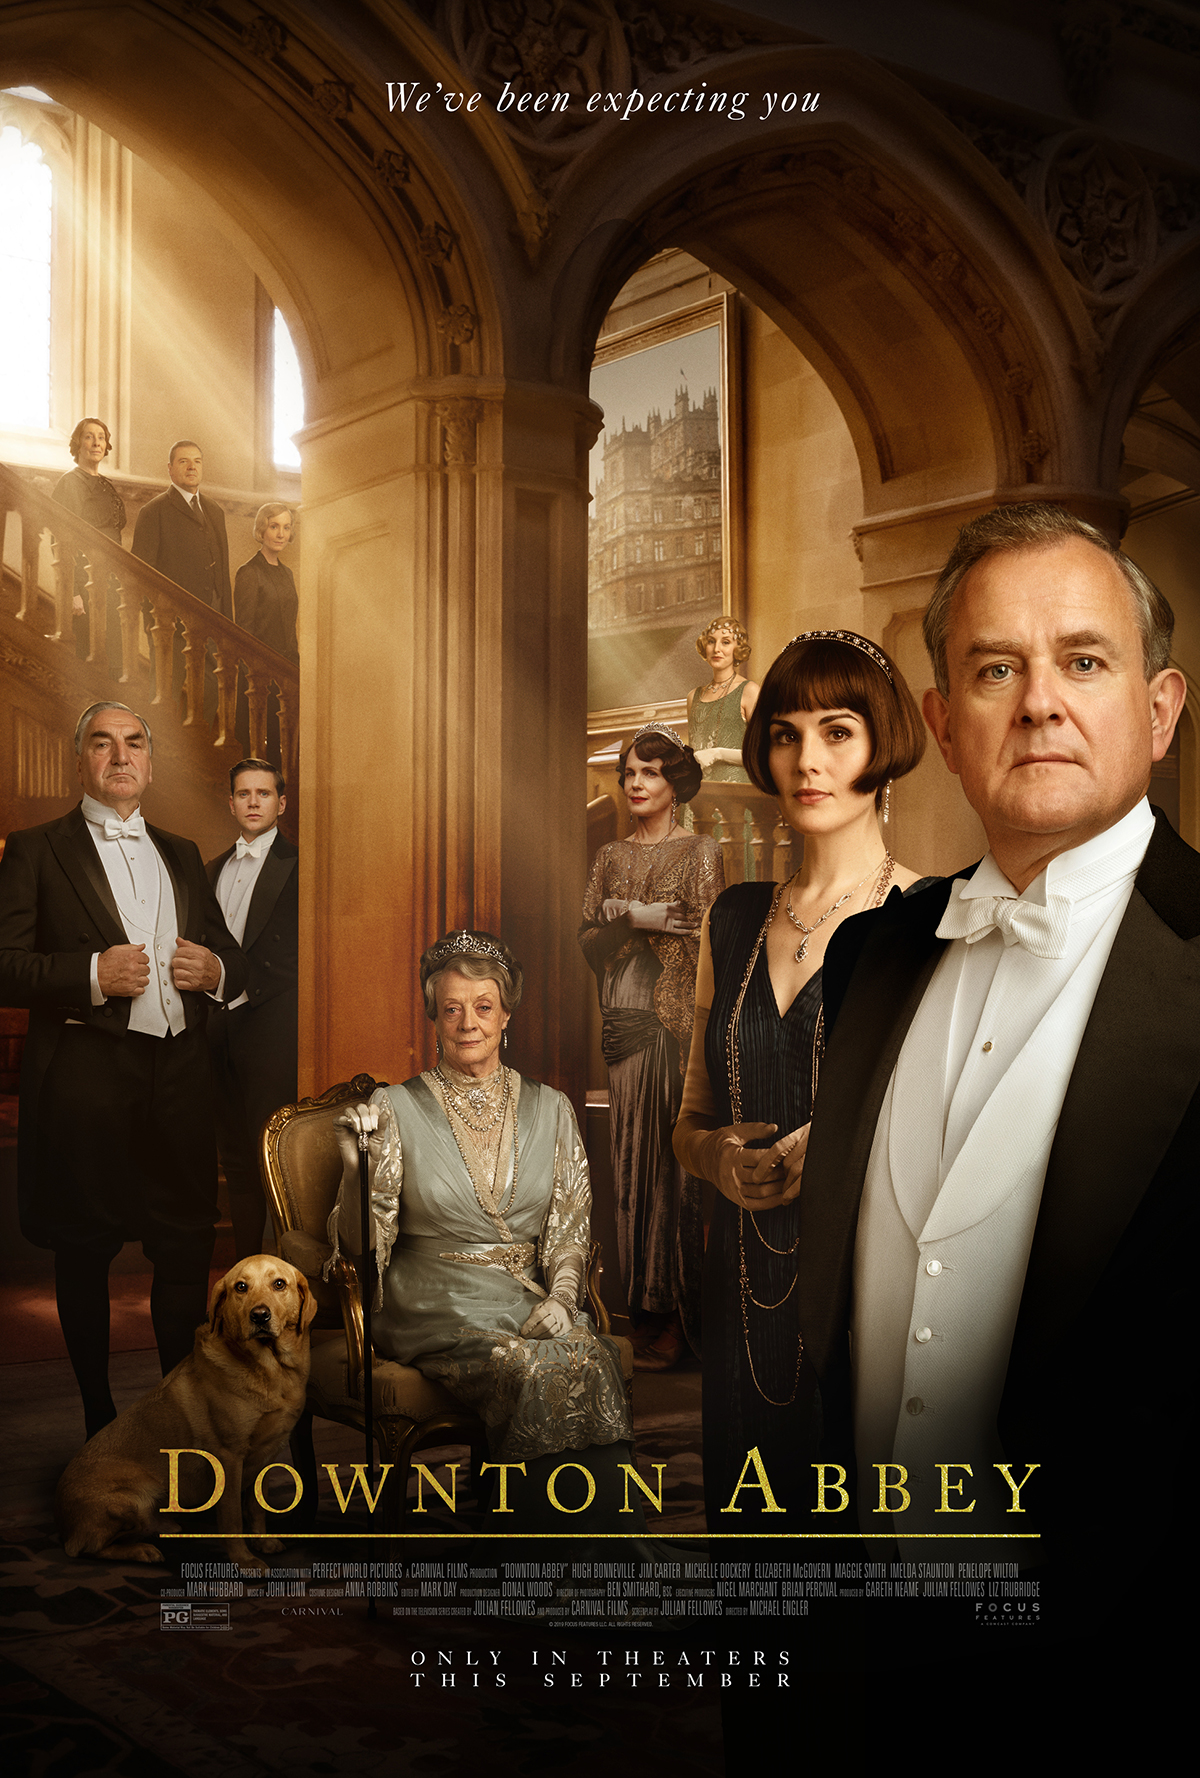 Downton Abbey 2 Movie Gets Pushed Back to Spring 2022